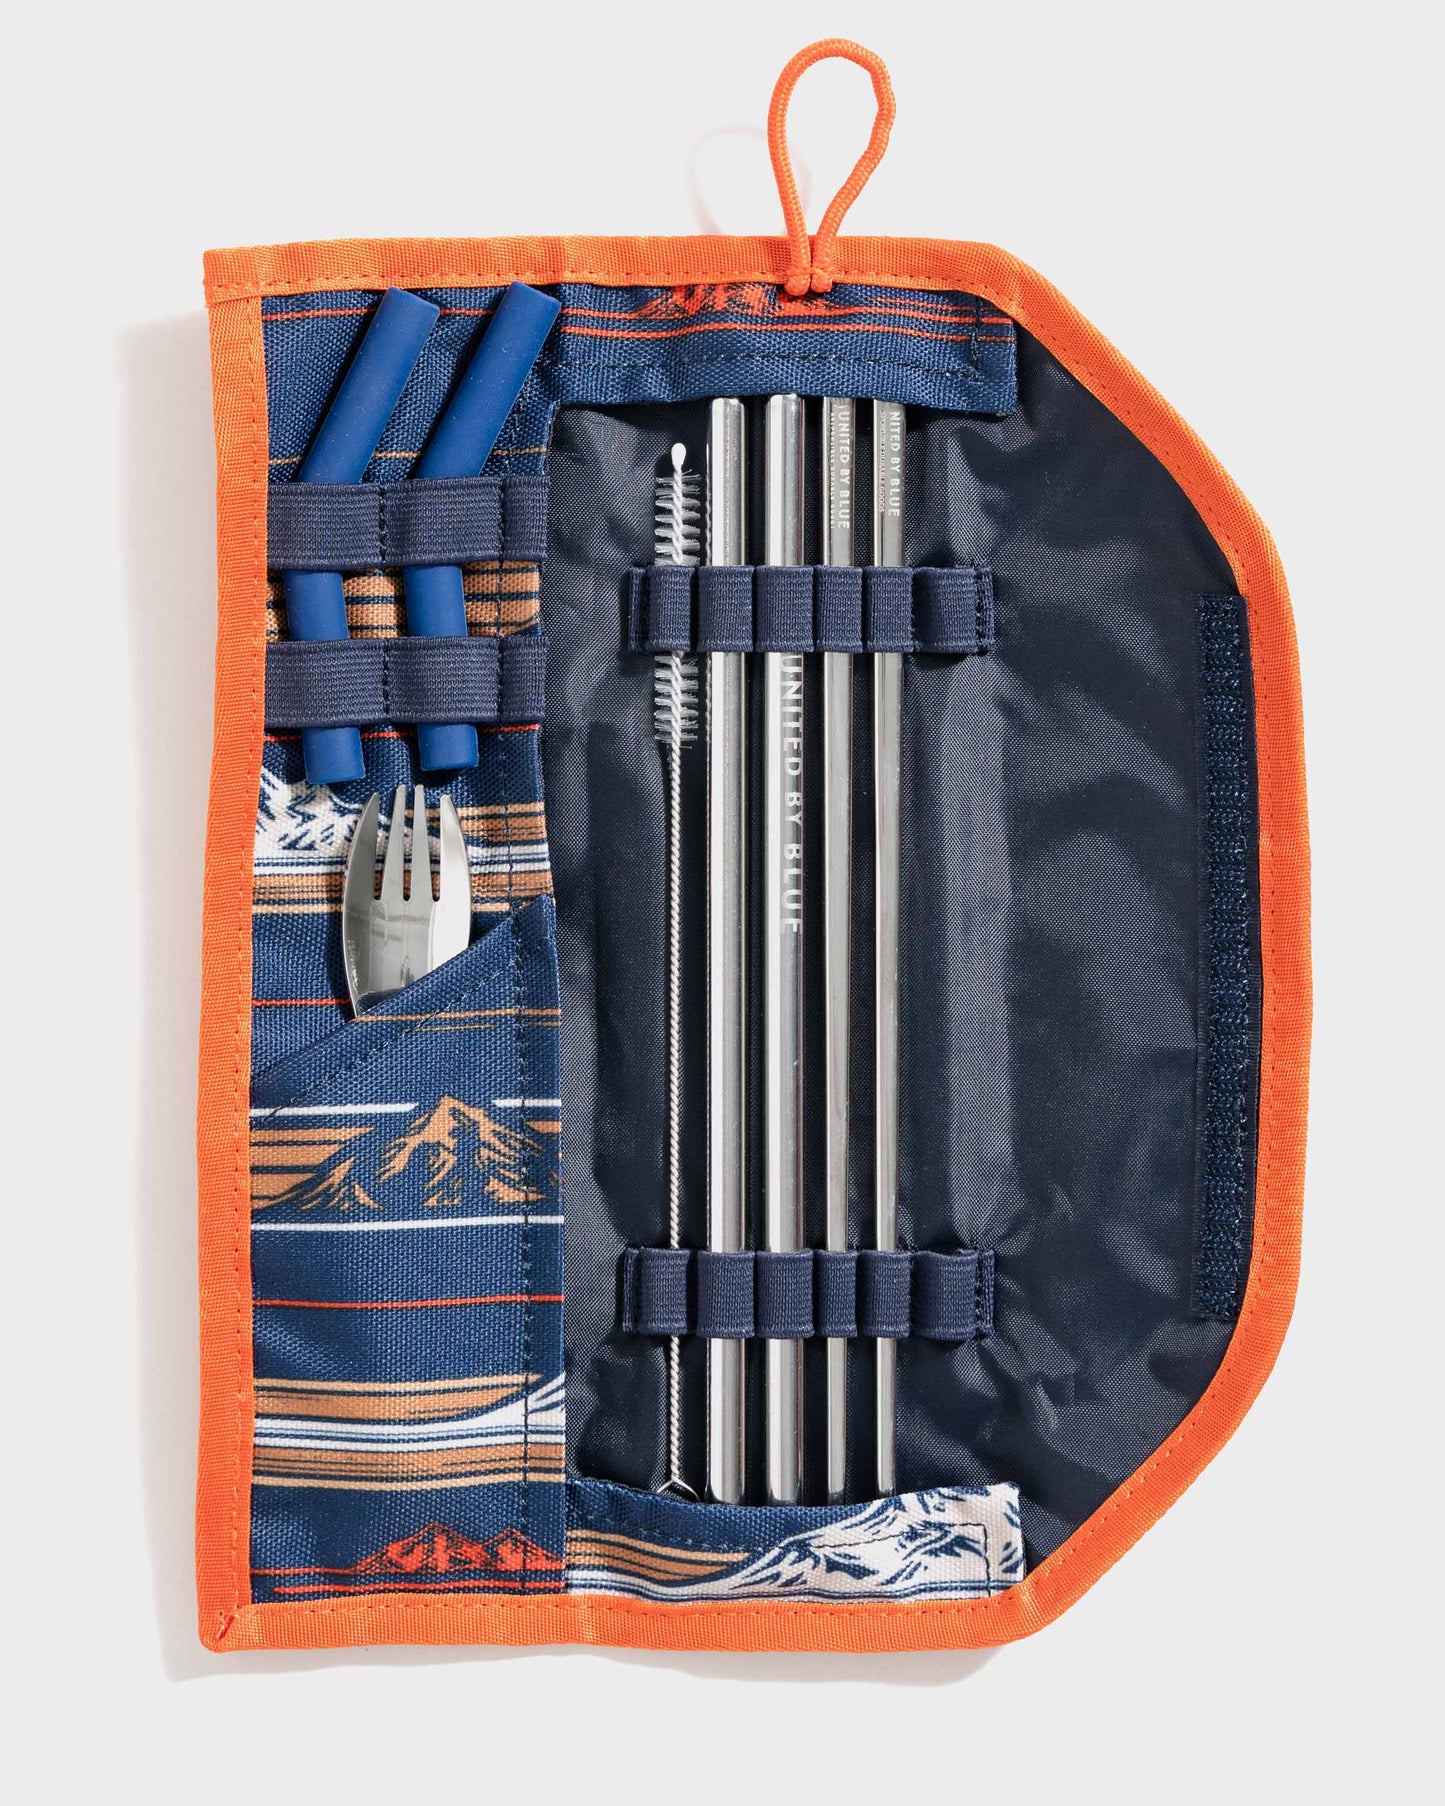 Mountains travel kit showing all utensils by United by Blue